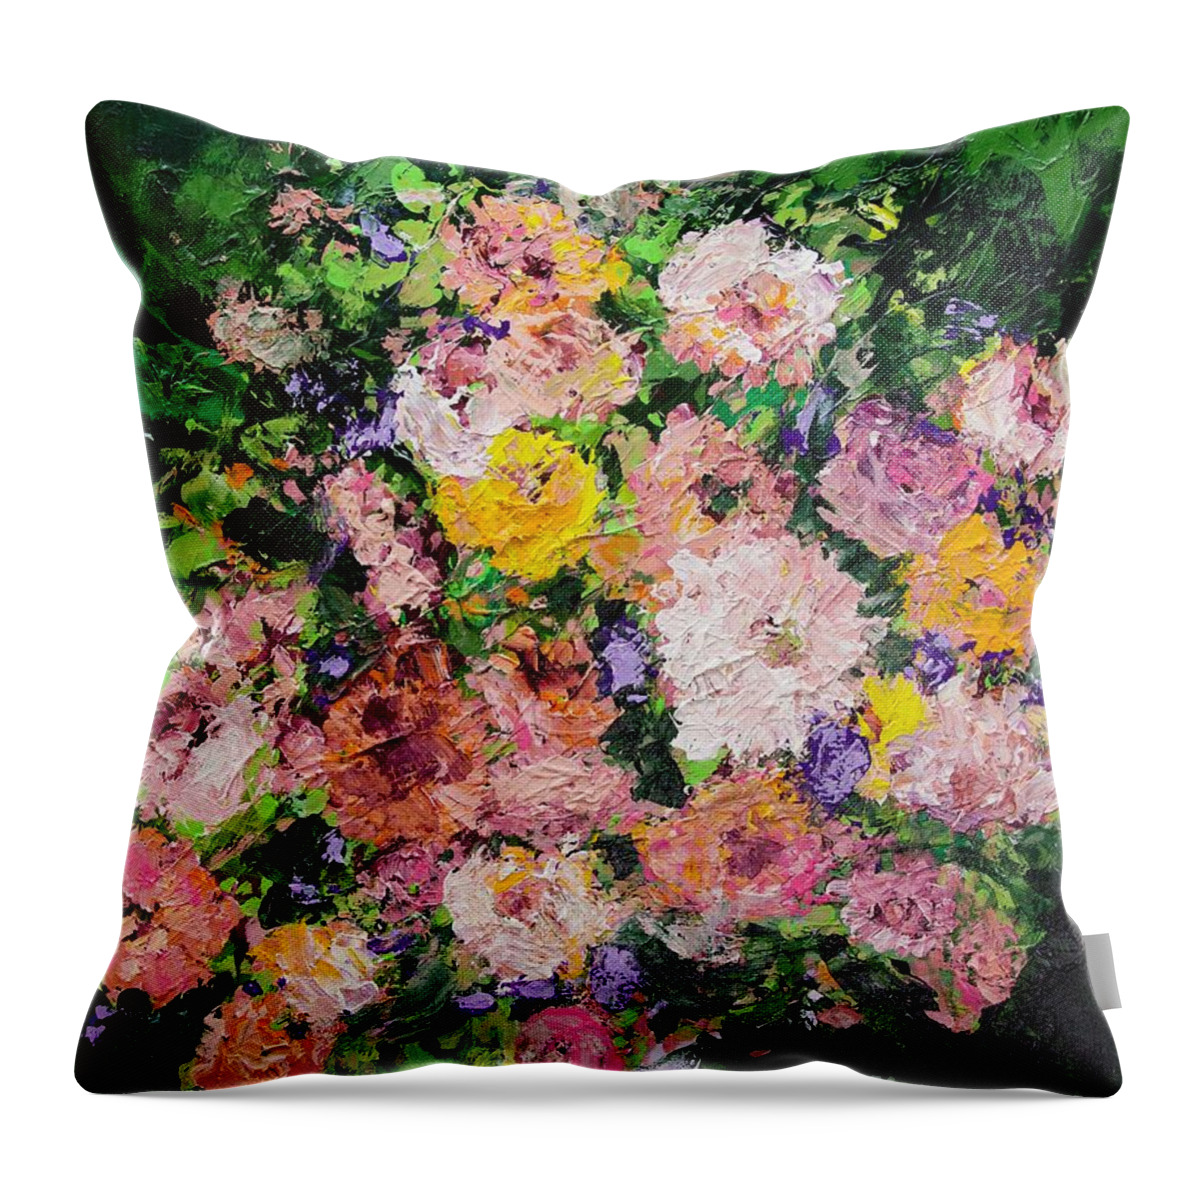 Flower Throw Pillow featuring the painting Heavenly Garden by Allan P Friedlander